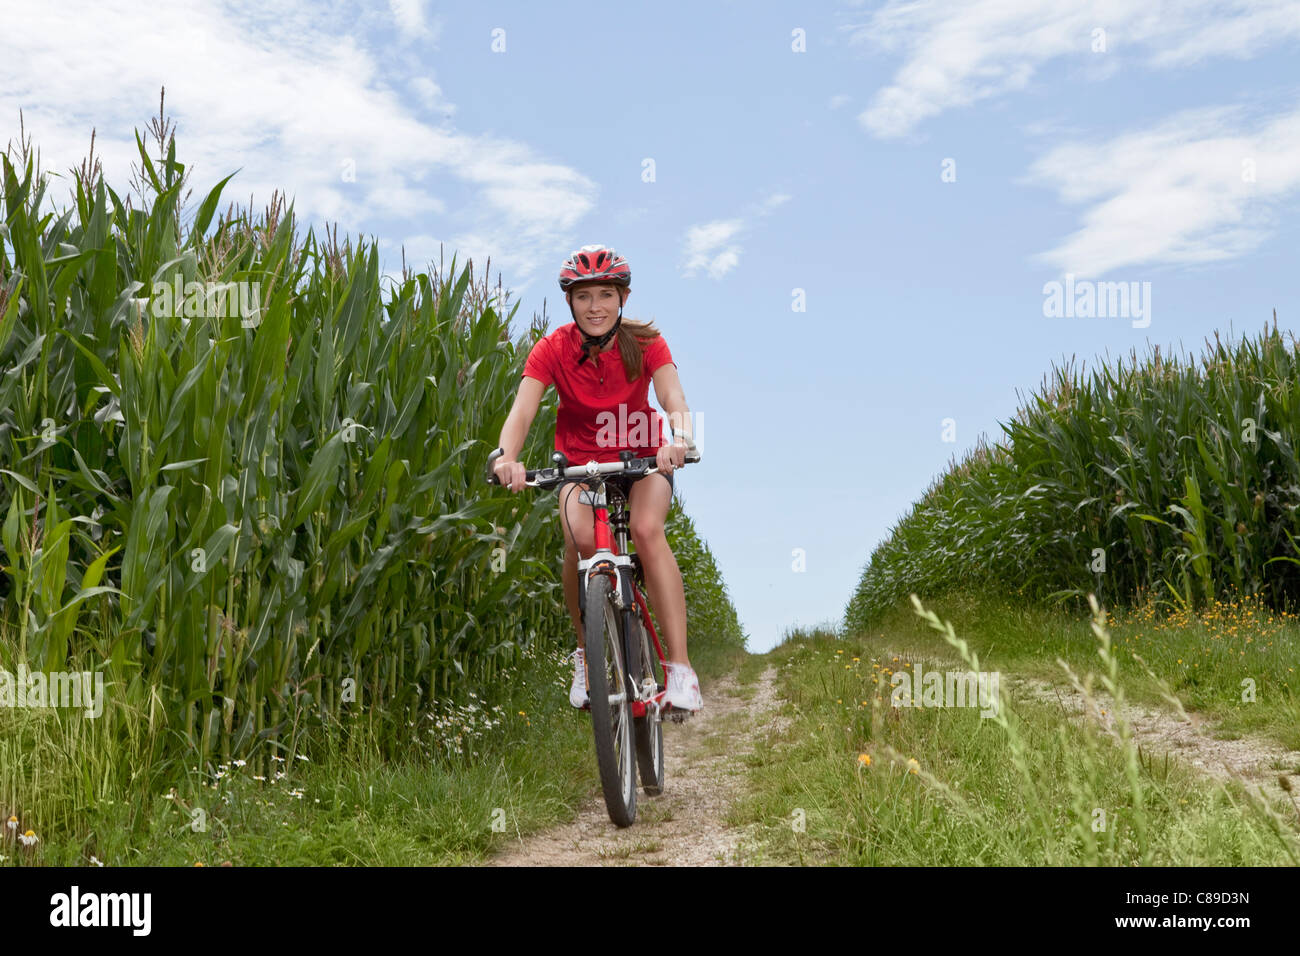 Germany, Bavaria, young woman riding mountain bike Banque D'Images